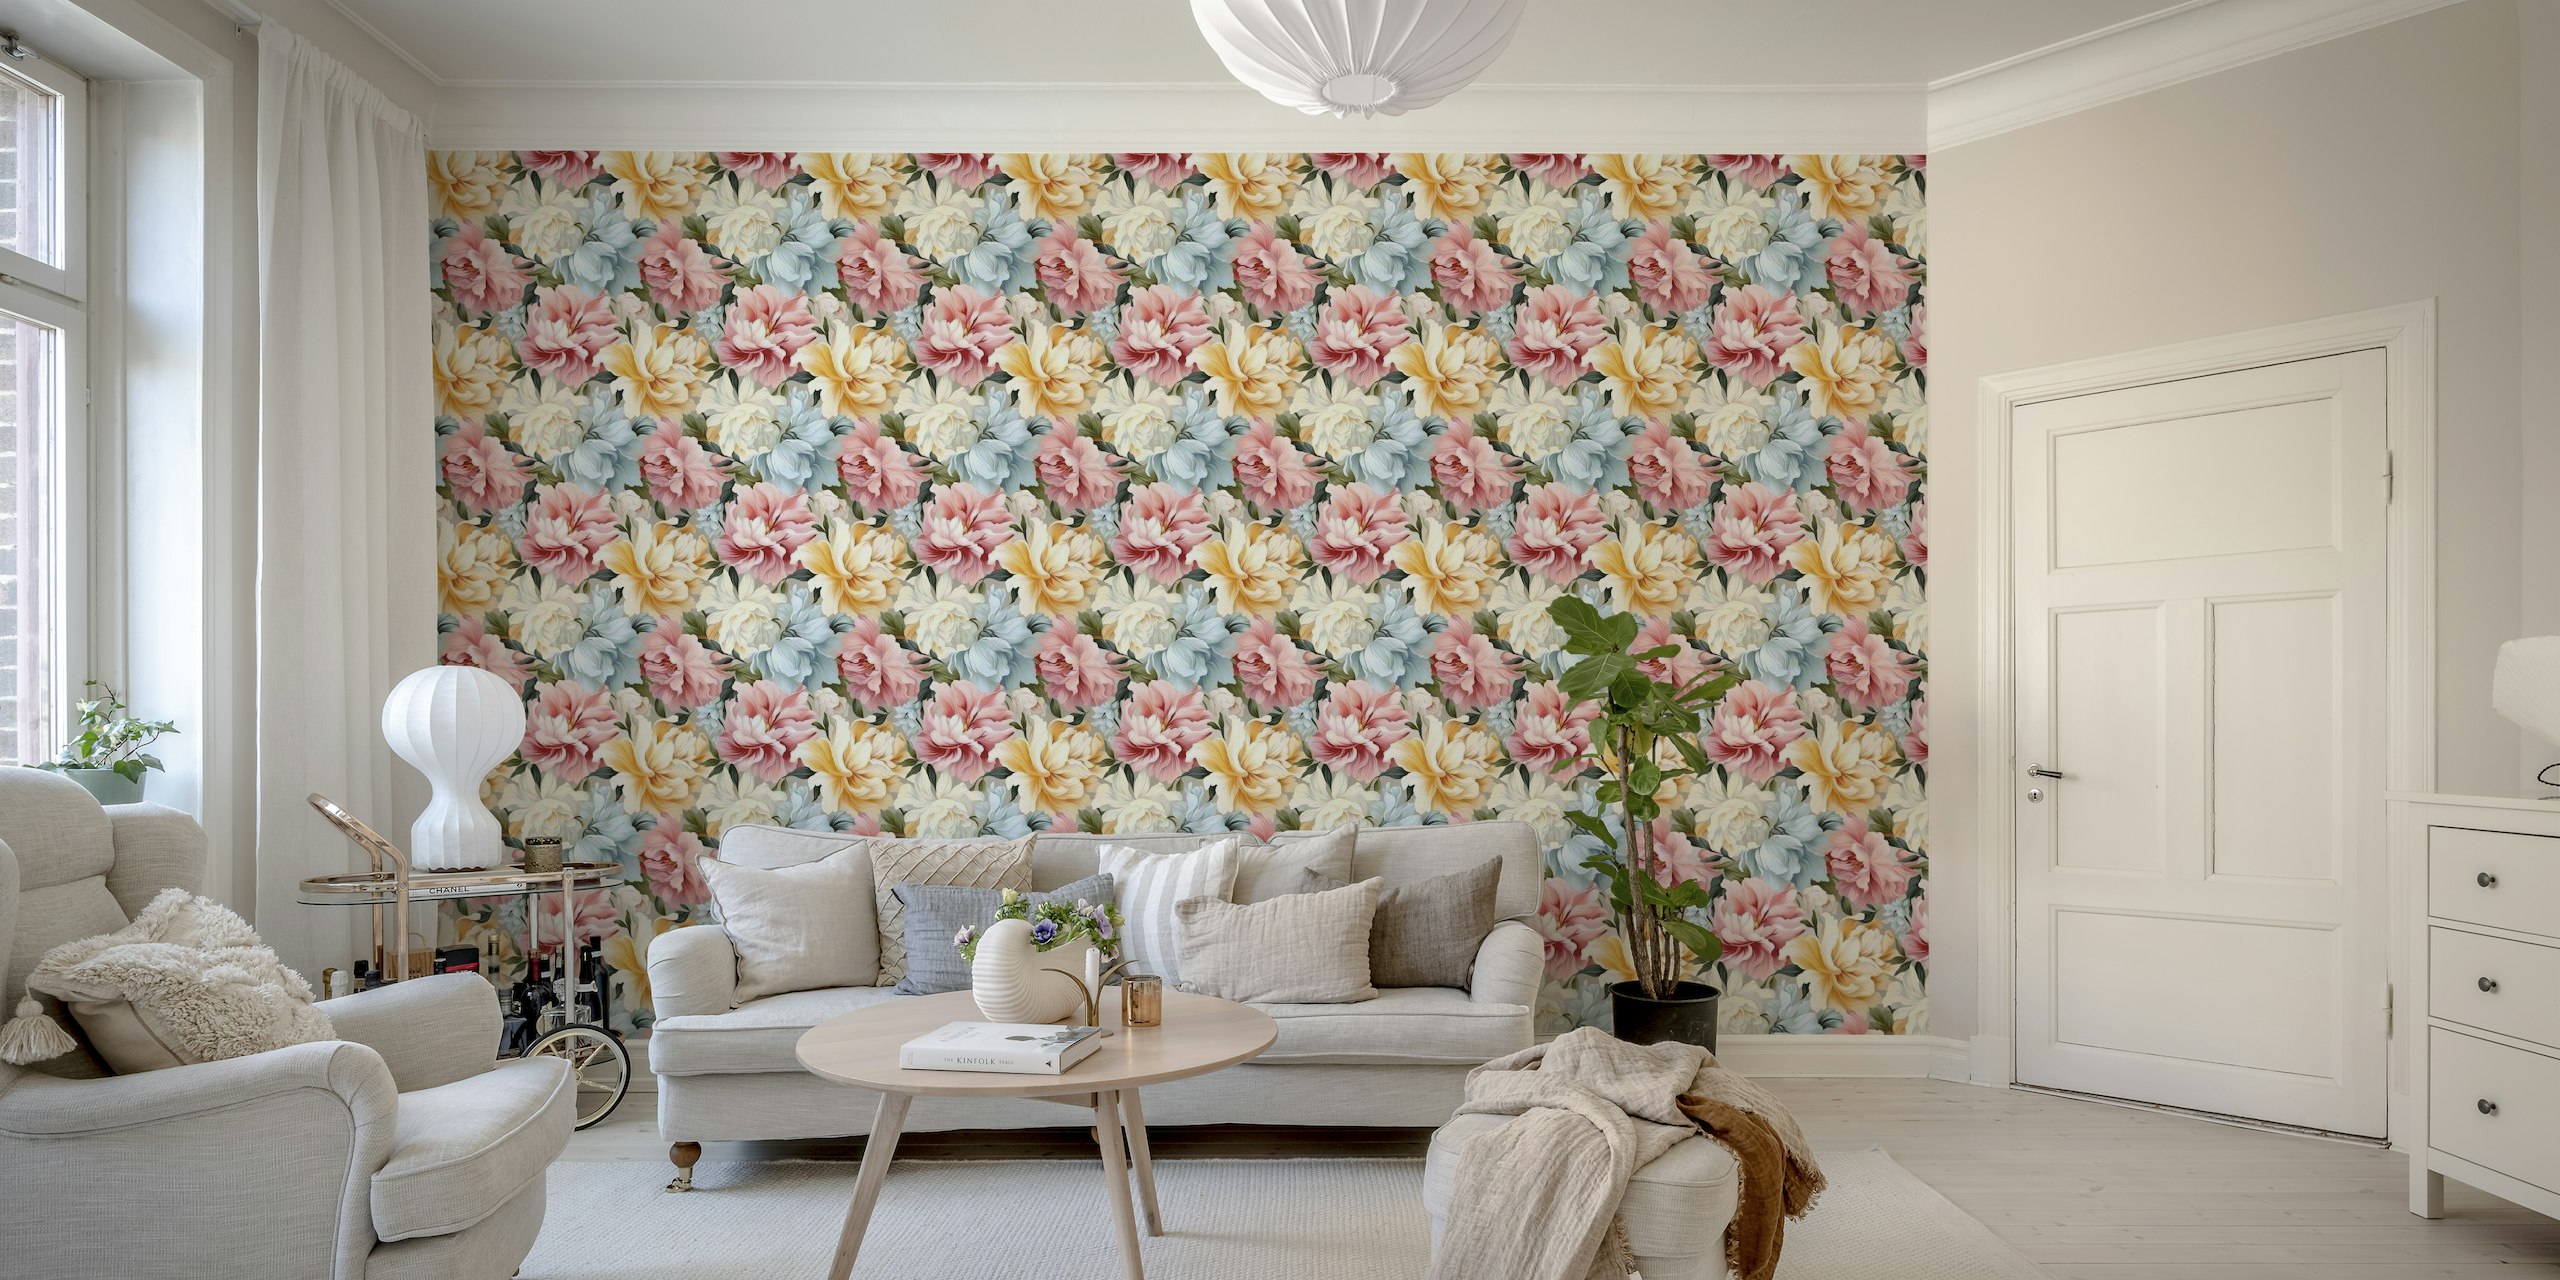 Blossom Bliss Peony Wall Covering behang